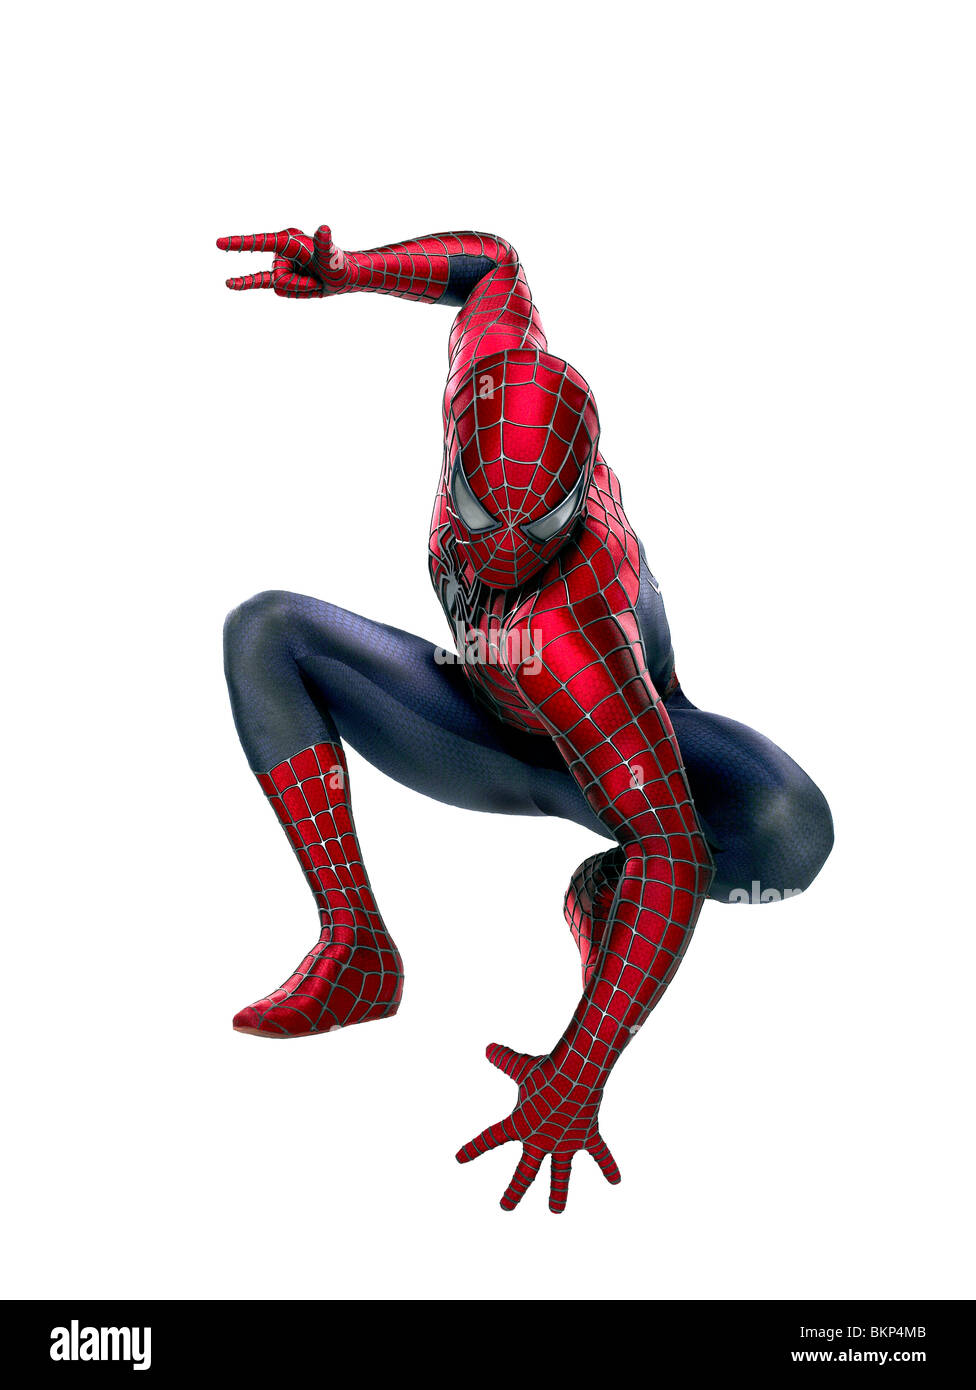 Spiderman Cut Out Stock Images & Pictures - Alamy